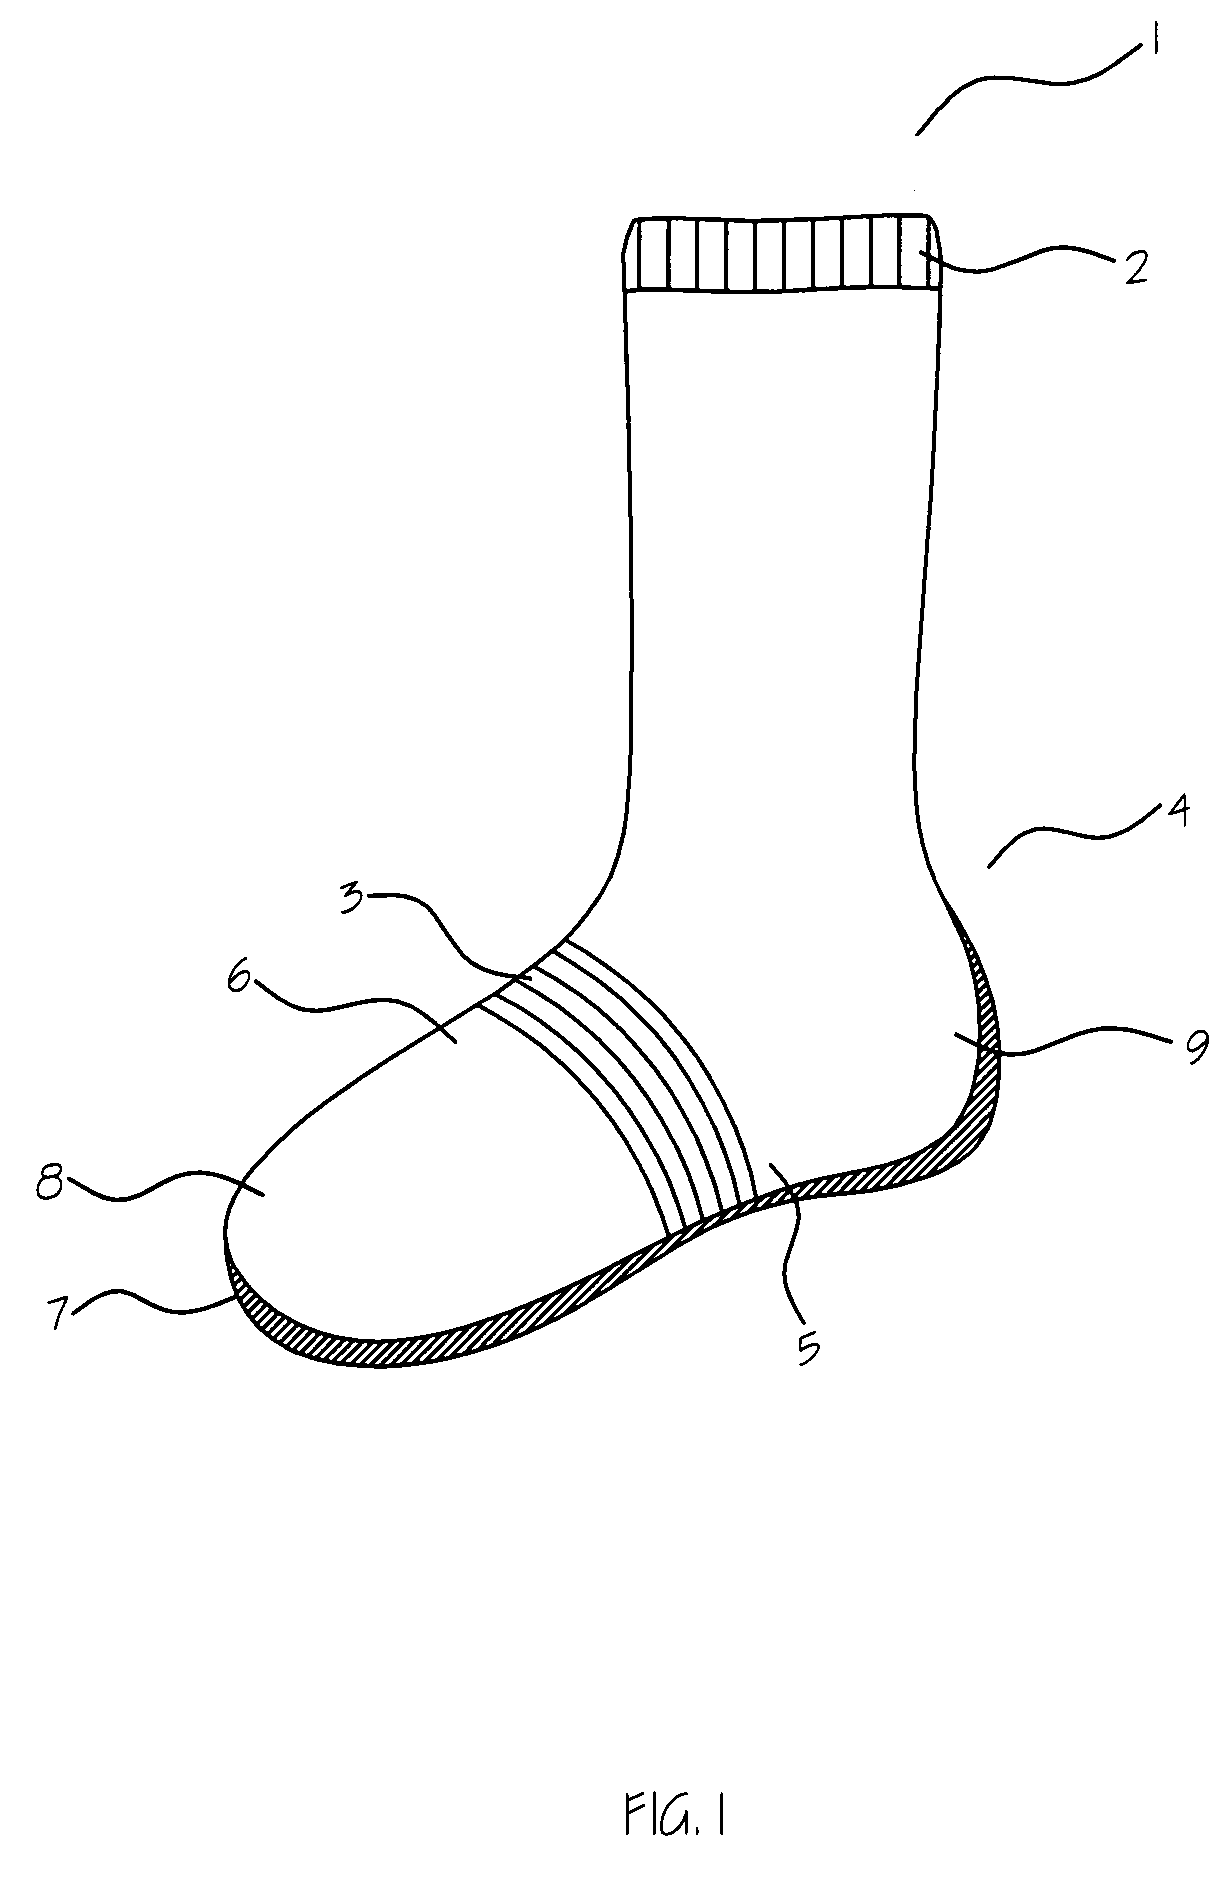 Method of producing porous nitrile rubber coated indoor athletic socks